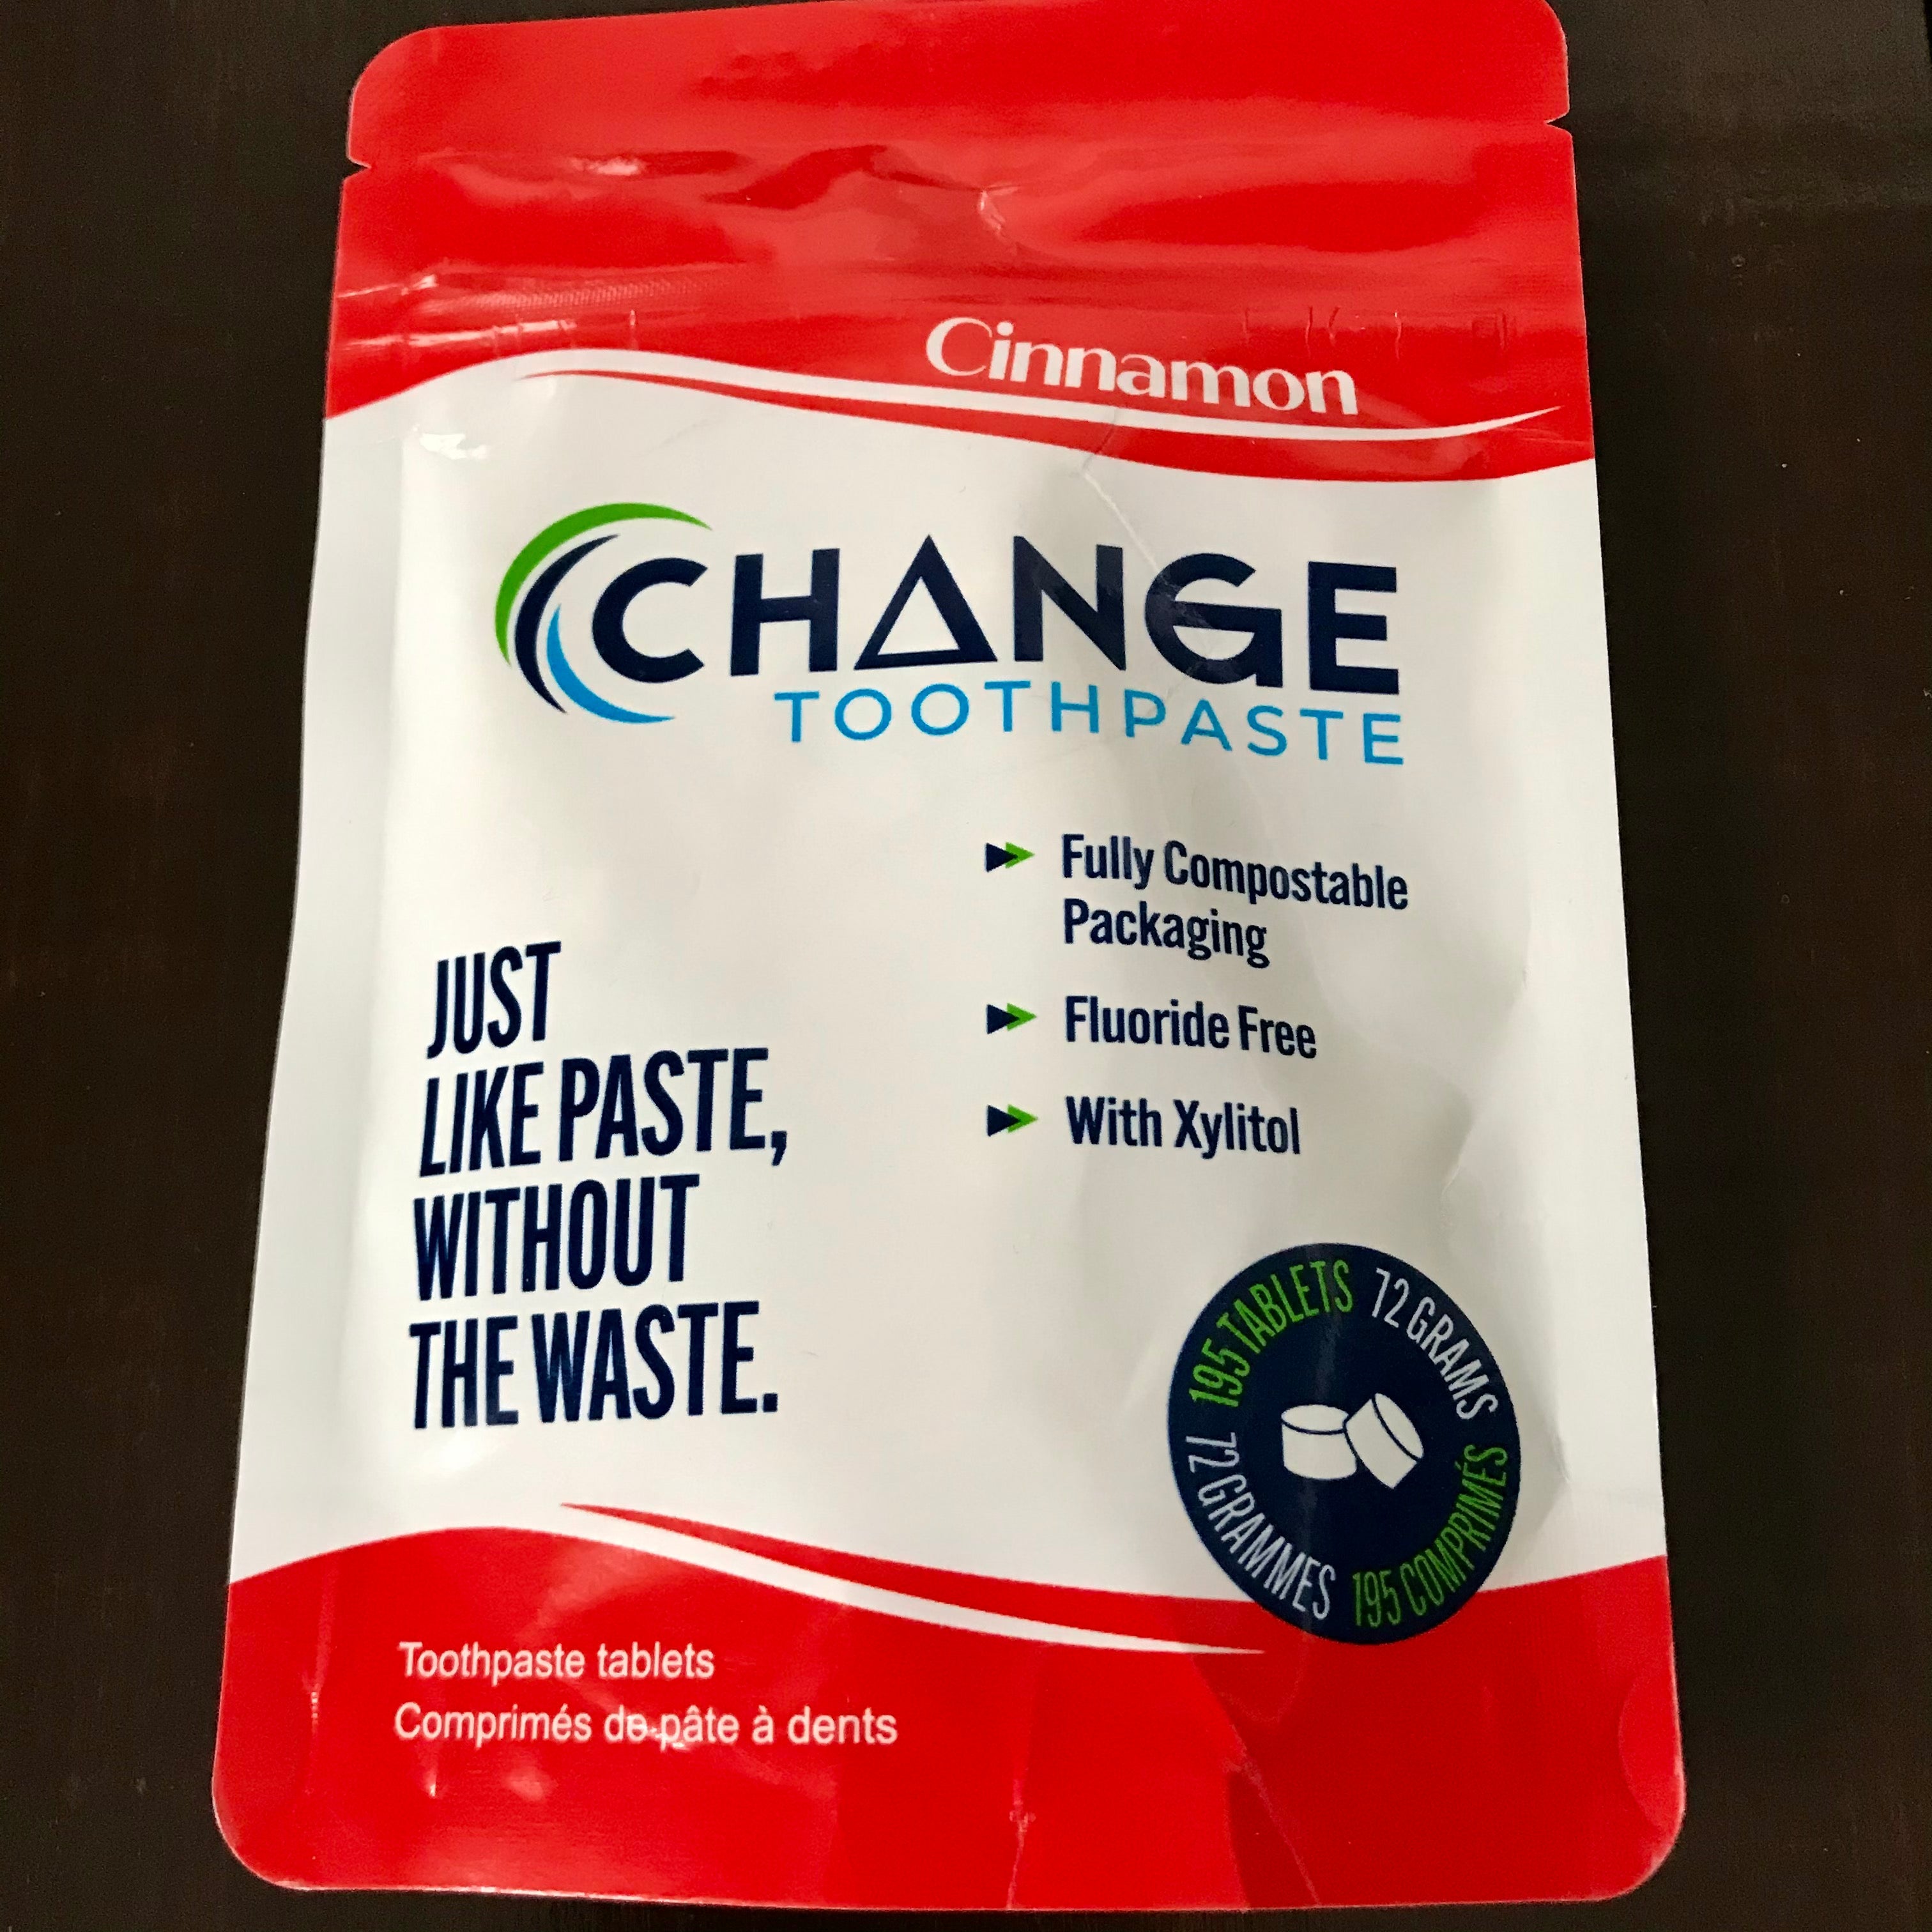 canadian made cinnamon change toothpaste tablets 195 3 month supply in compostable packaging